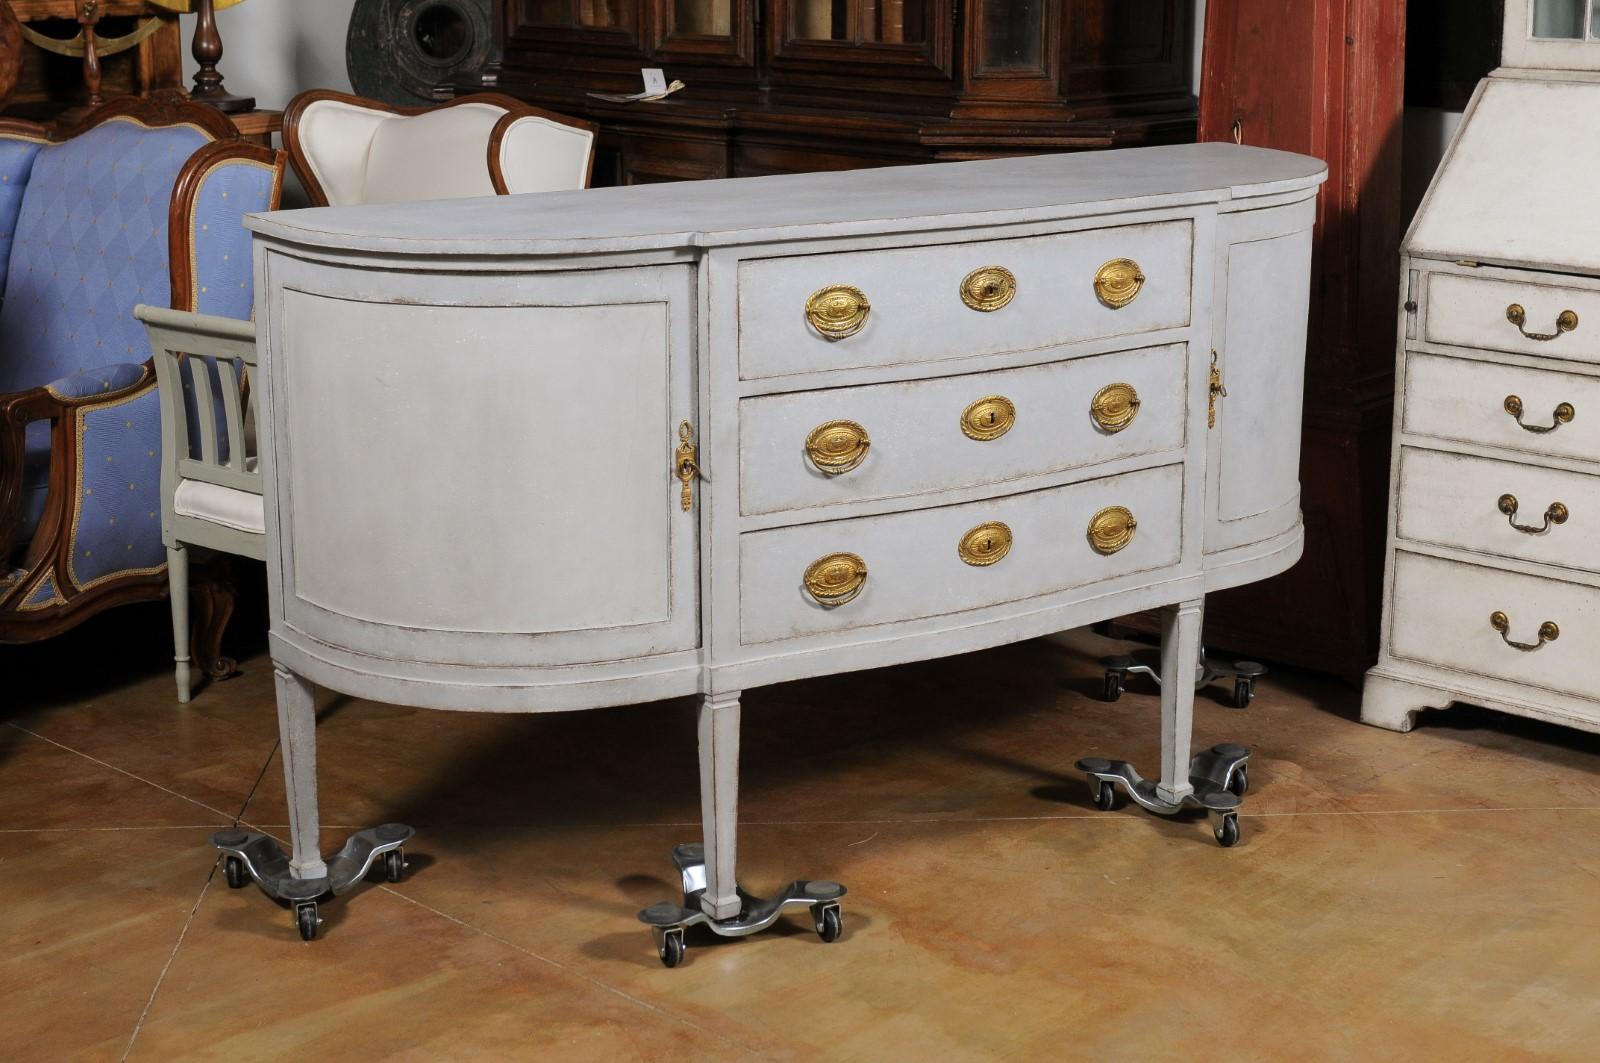 European 1830s Painted Demilune Sideboard with Three Drawers and Rounded Doors For Sale 1